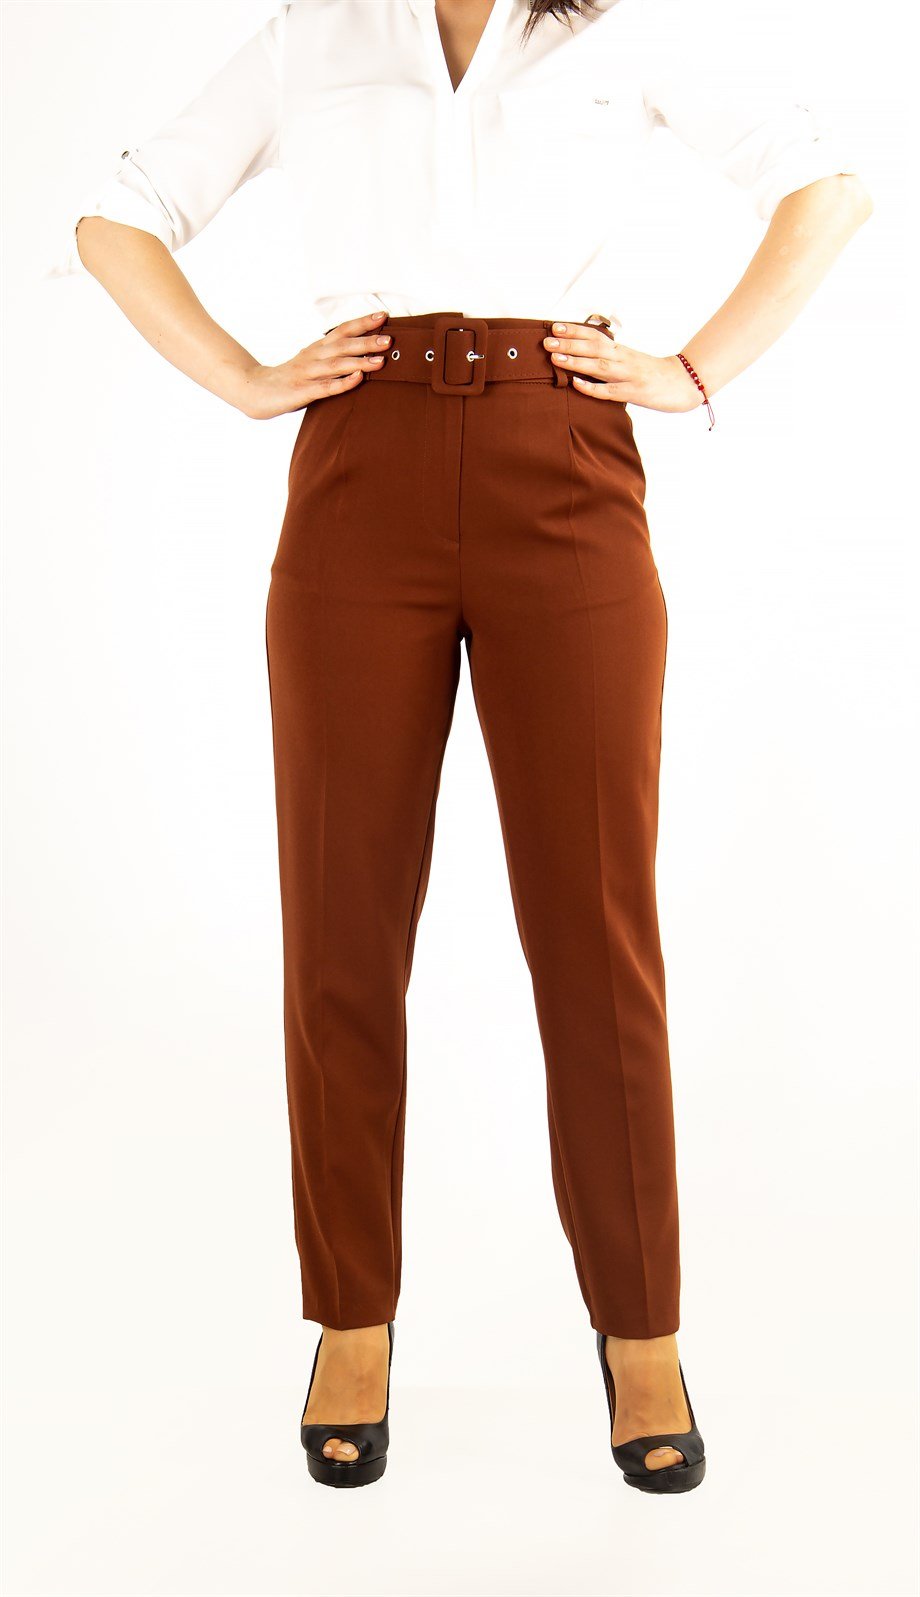 Casual Formal Office Trousers For Ladies Pants With Matching Belt  Brick  Red  Wholesale Womens Clothing Vendors For Boutiques